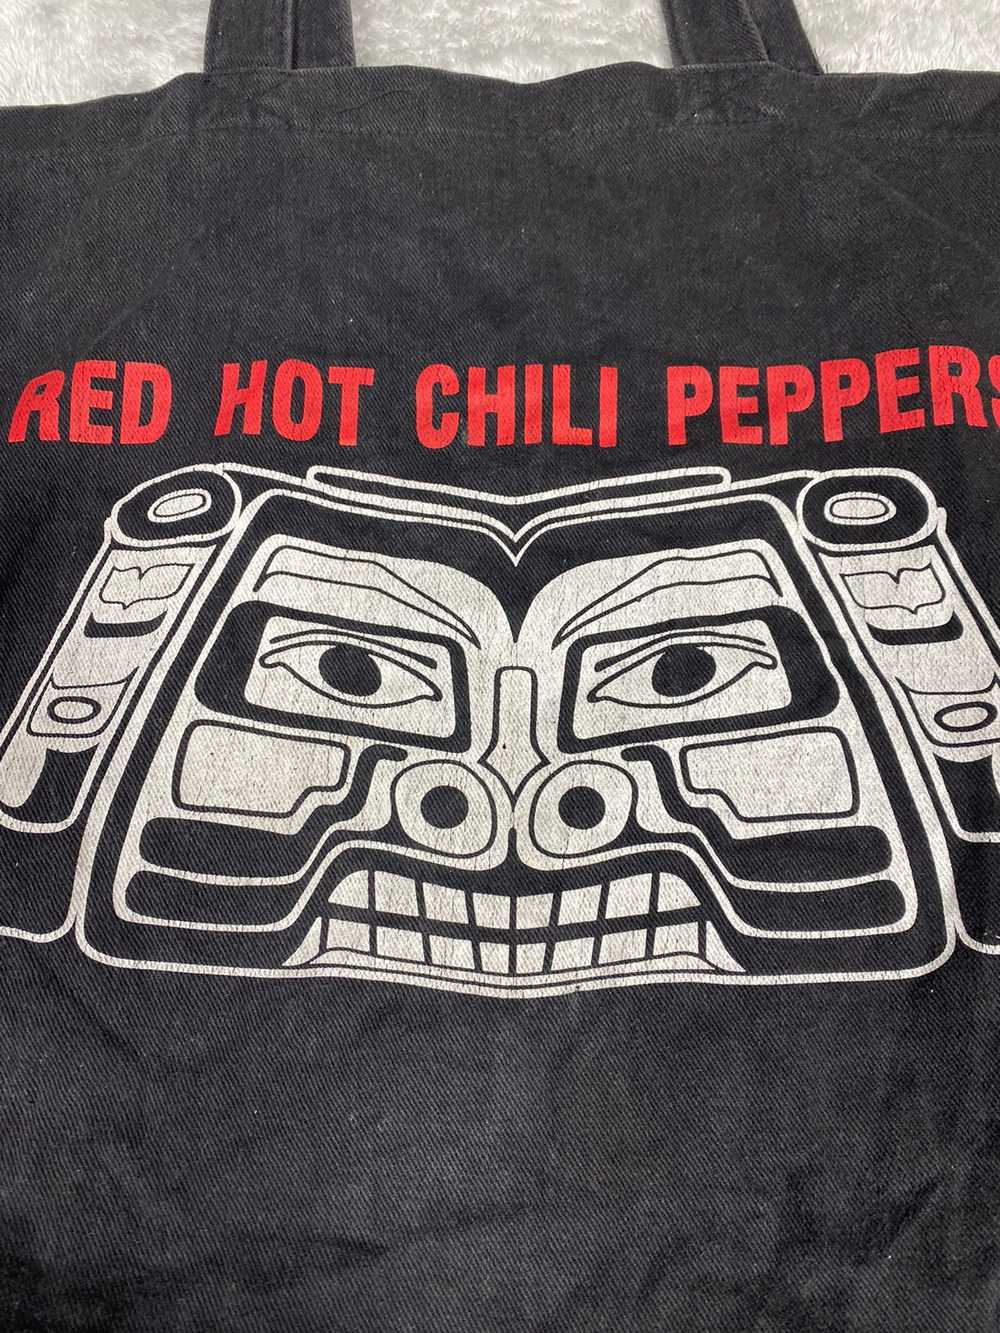 Vintage - Vintage Bootleg Red Hot Chili Peppers - image 7